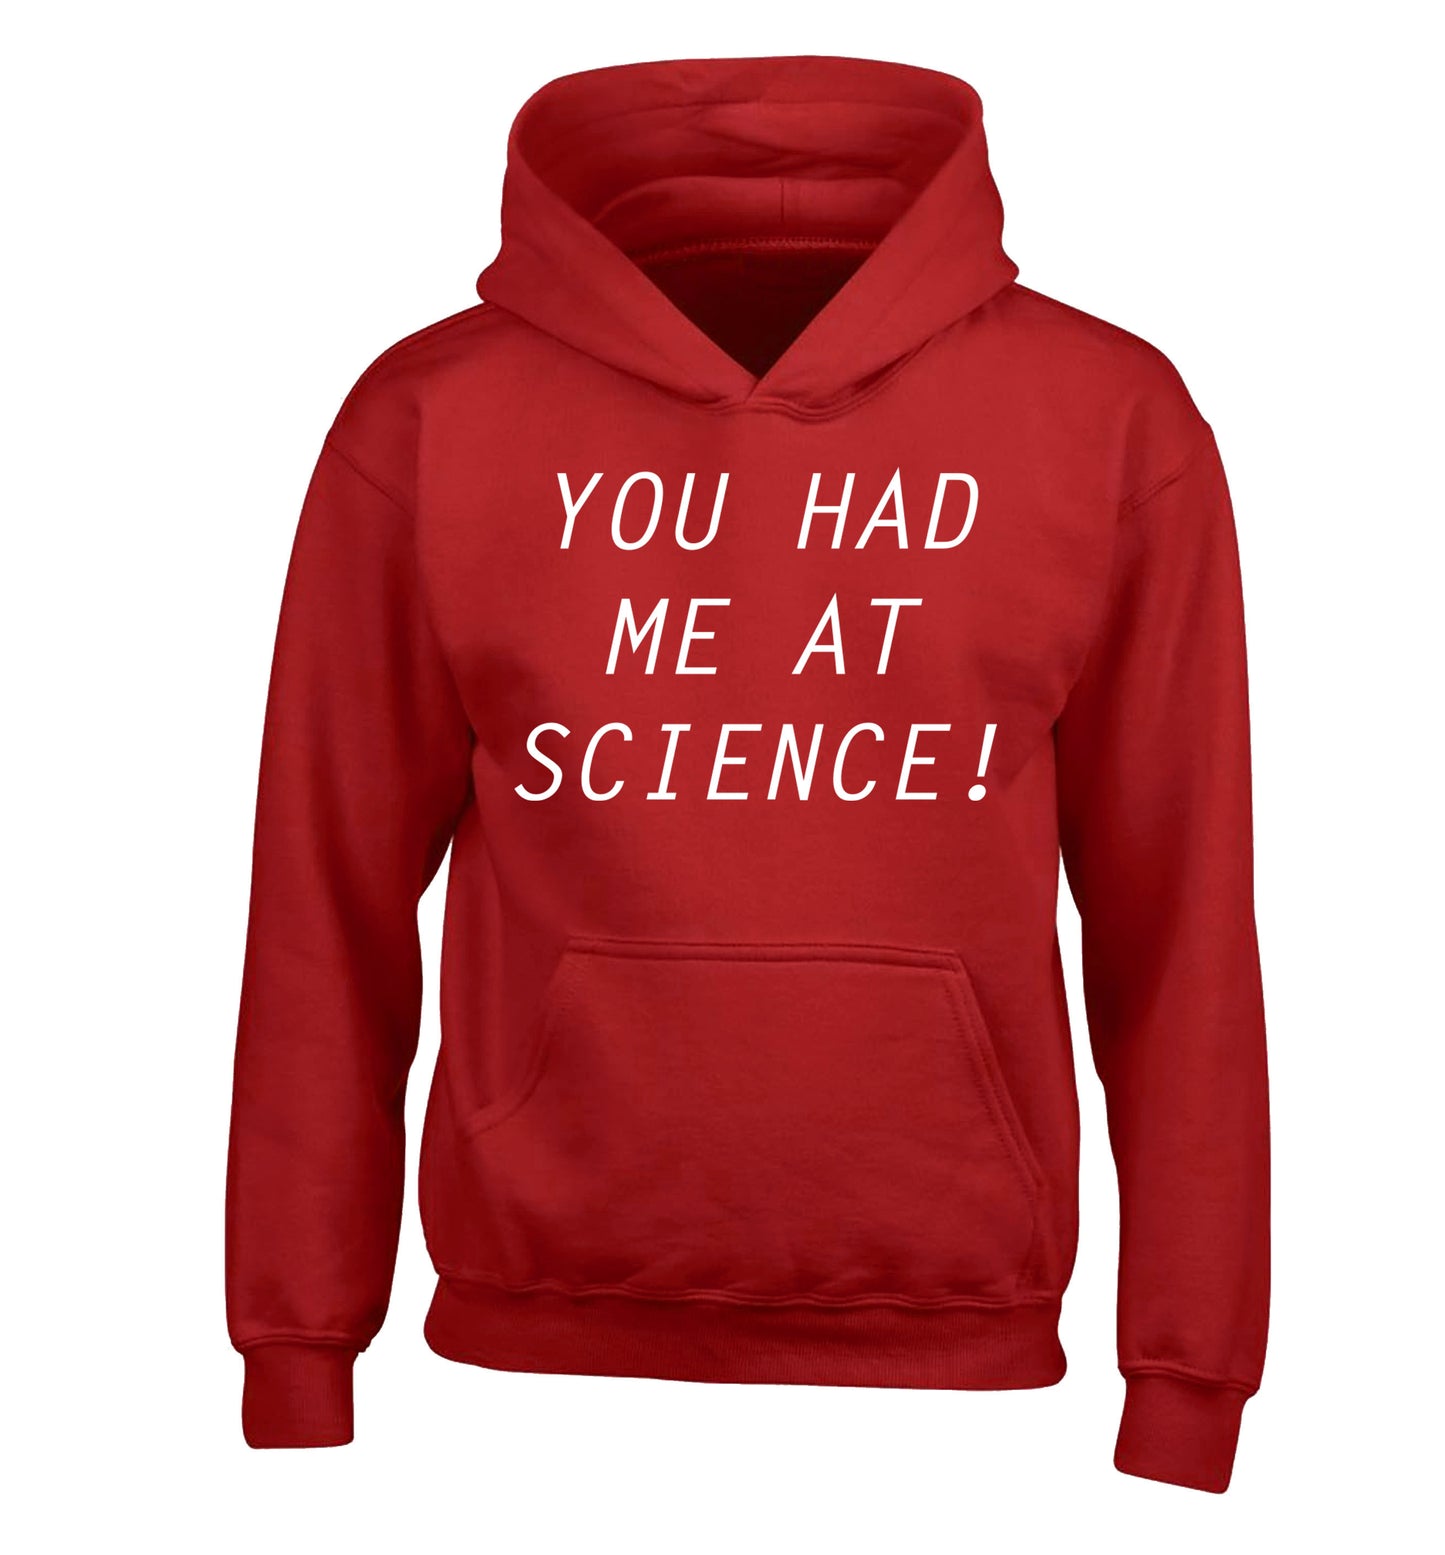 You had me at science children's red hoodie 12-14 Years